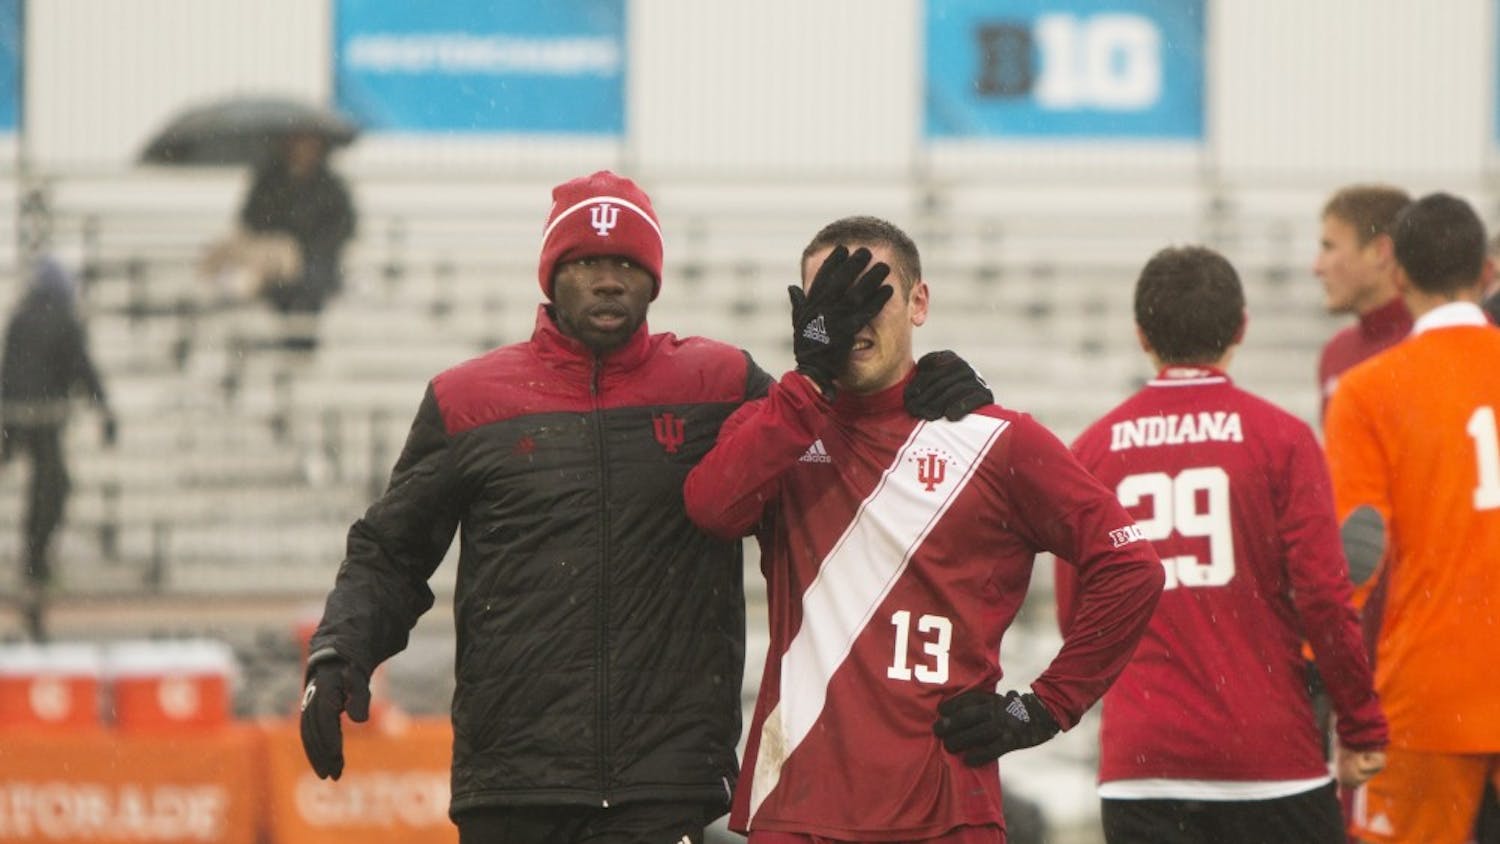 Junior midfielder Francesco Moore cries after the team's loss to Wisconsin at the Big Ten Championship on Sunday. The game took place in Westfield, Indiana.